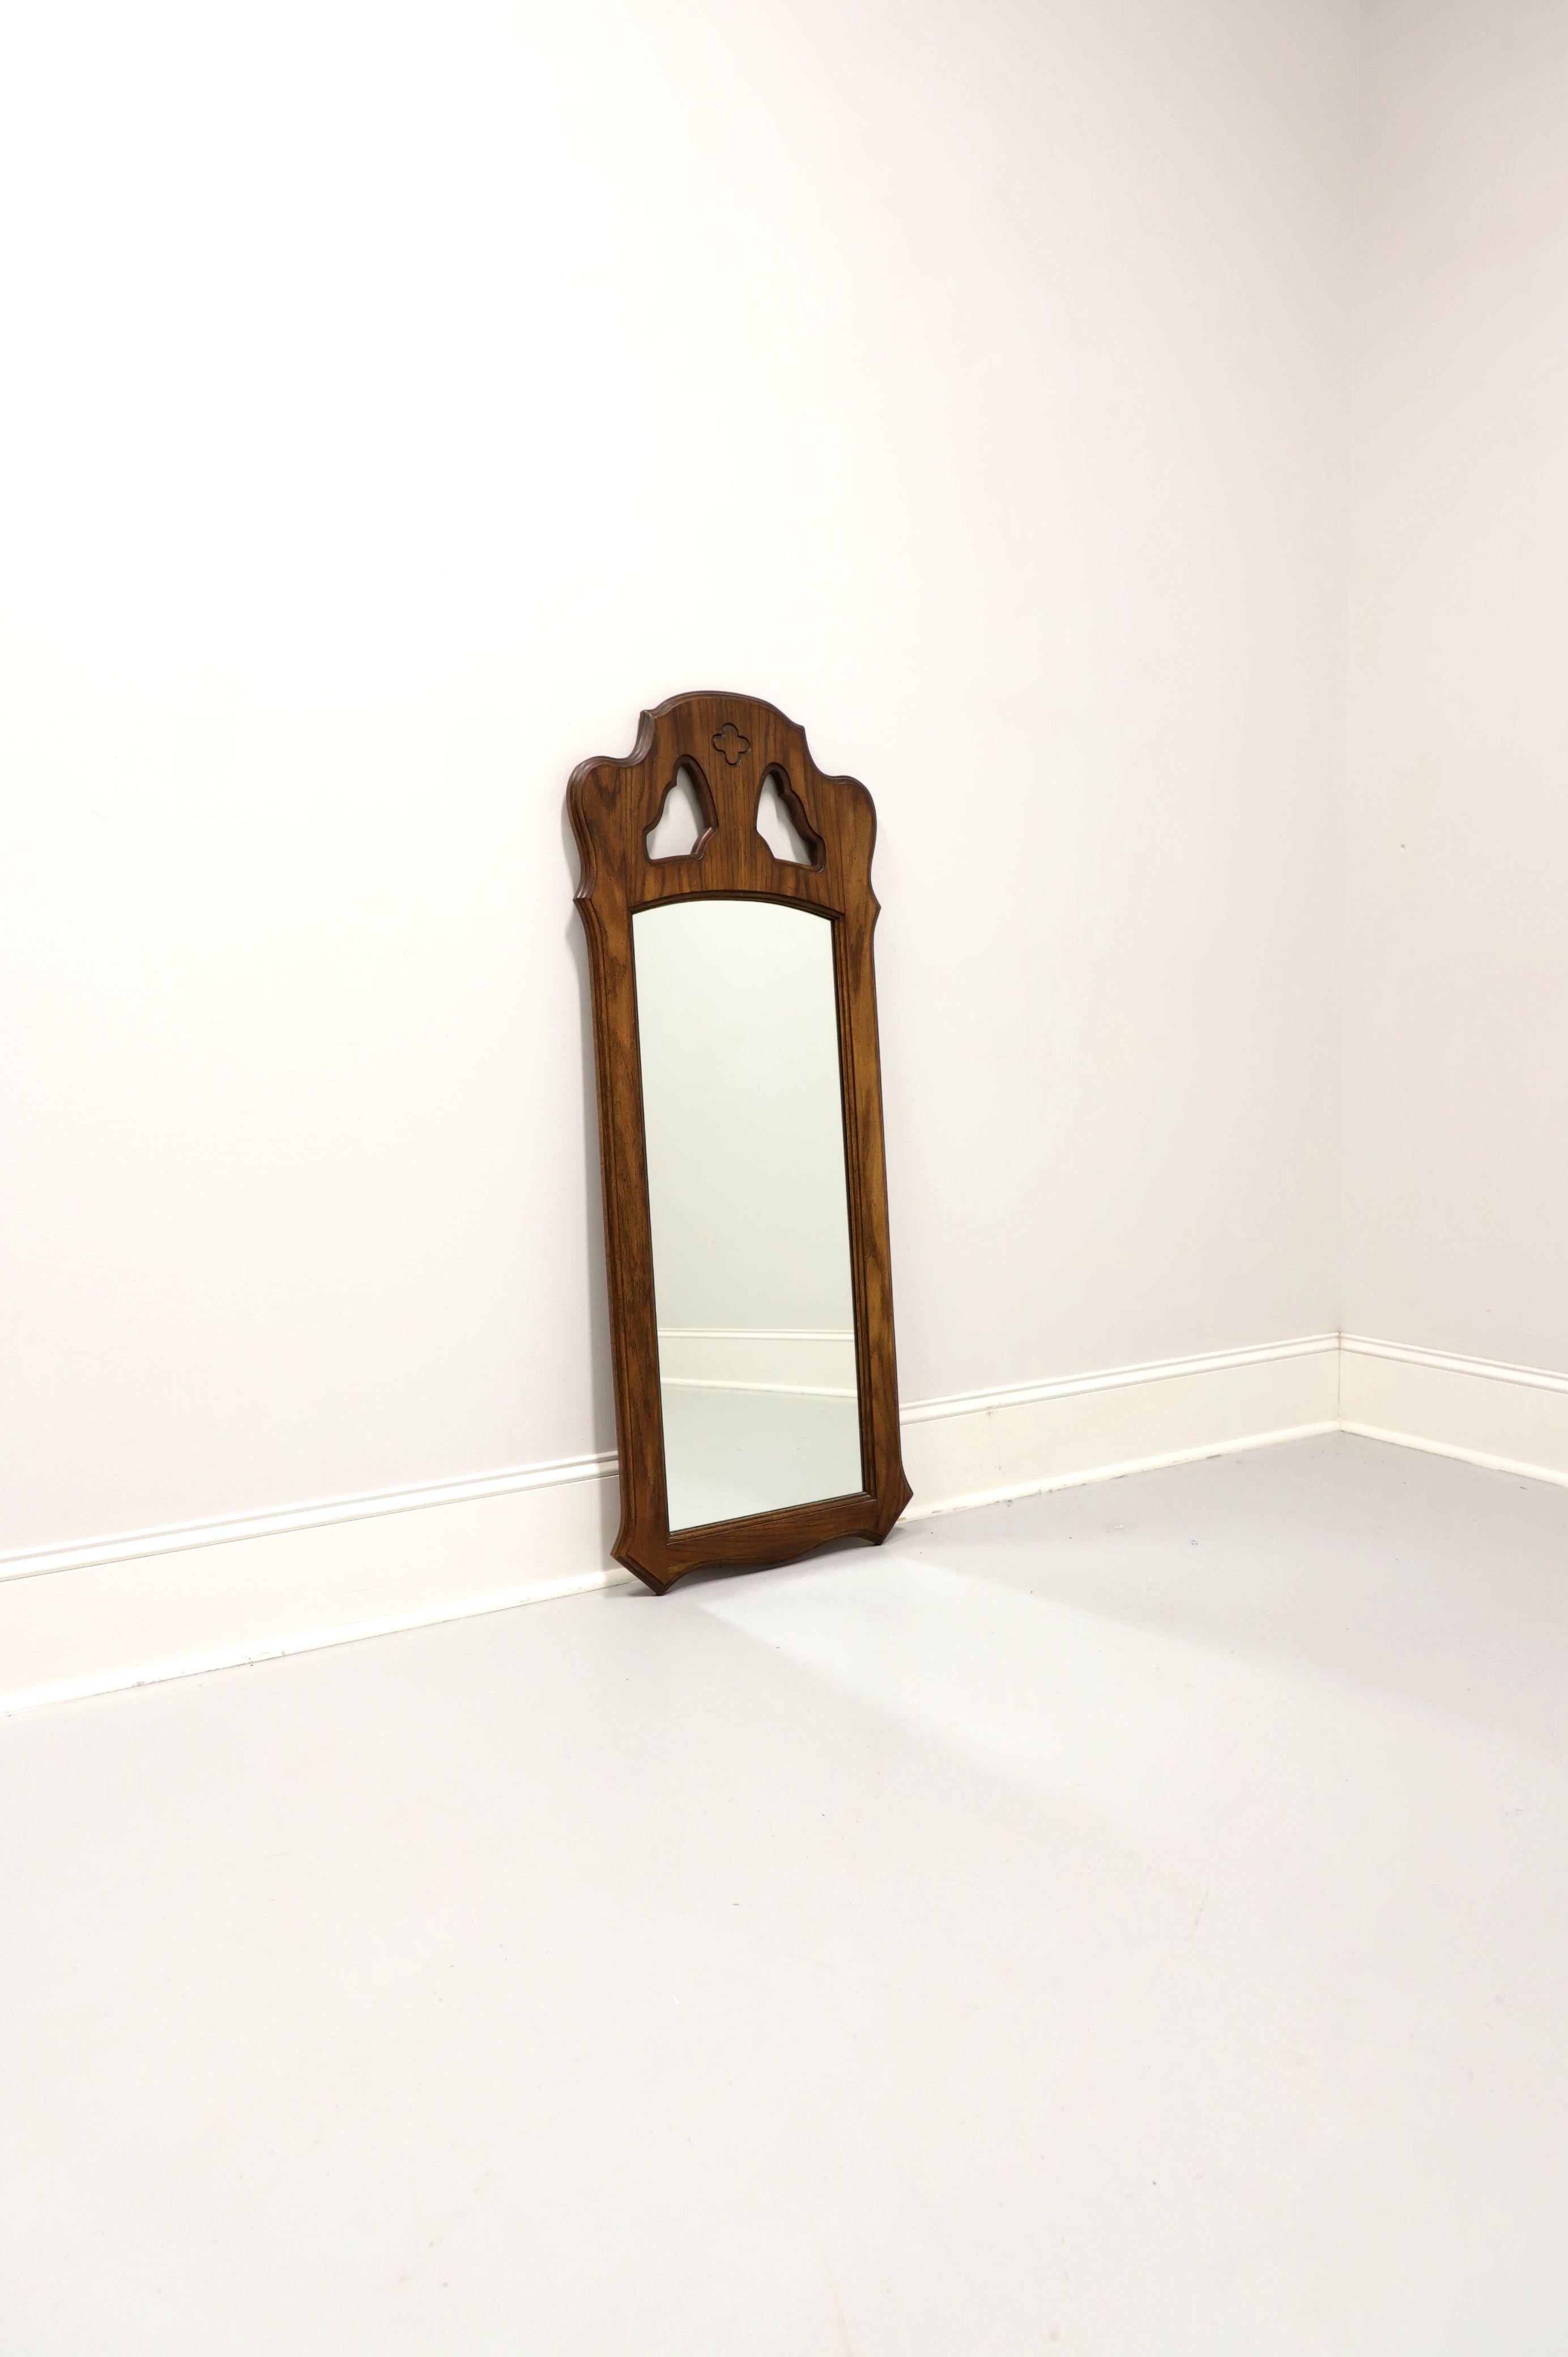 A Spanish Mediterranean style wall mirror by Stroupe Mirror, a division of Thomasville Furniture, from their Segovia Collection. Mirror glass in a solid oak frame with a slightly distressed finish, decoratively carved shape, and open carved area at